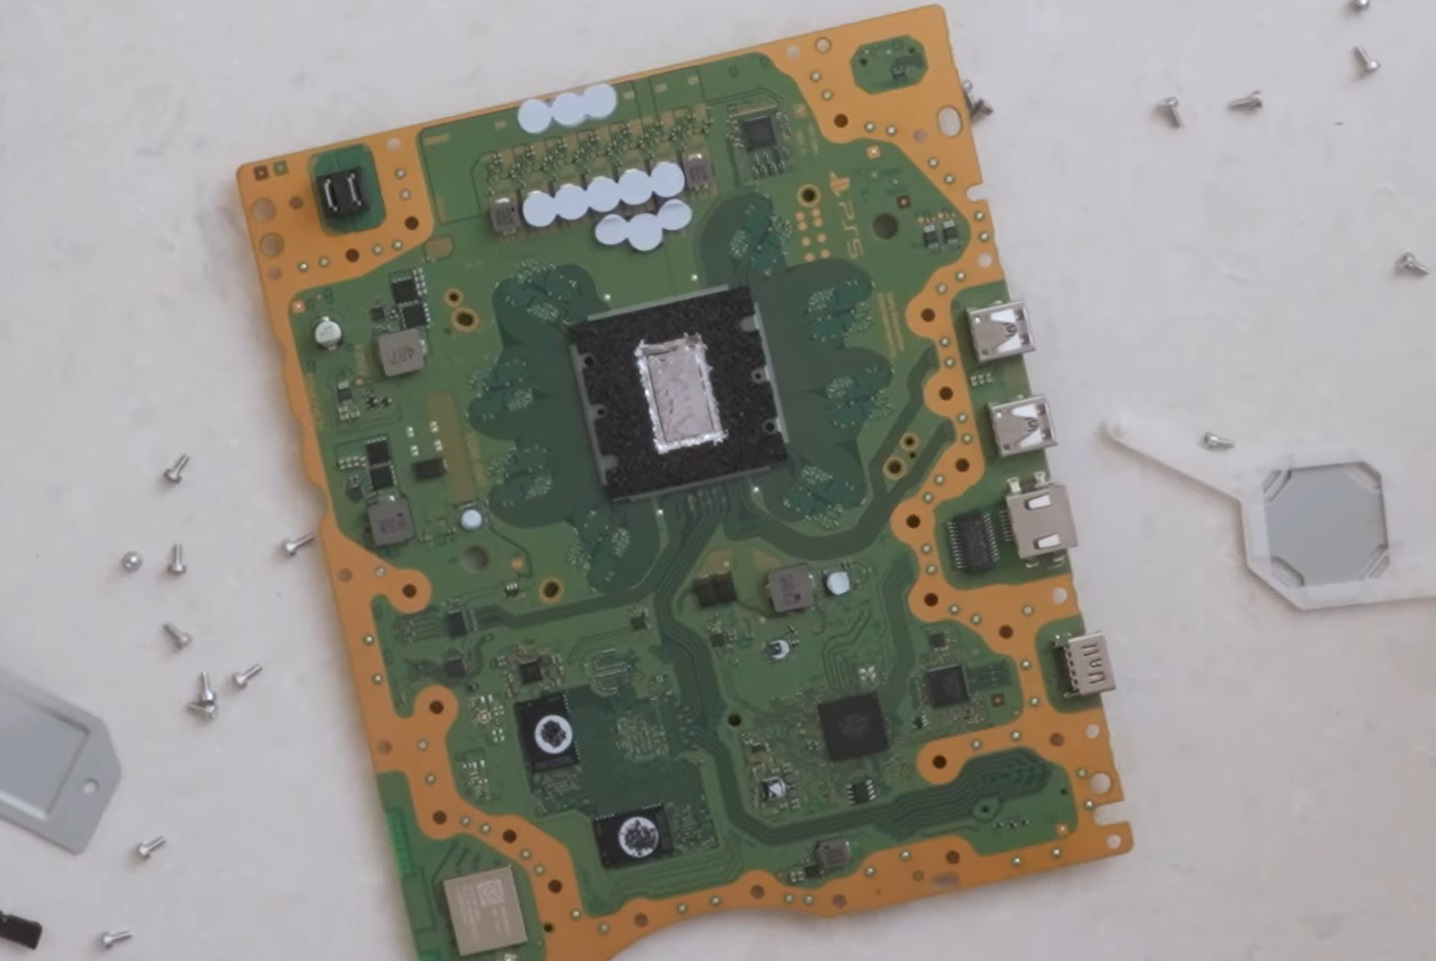 PS5 'Slim' Teardown Shows Everything Different From Original